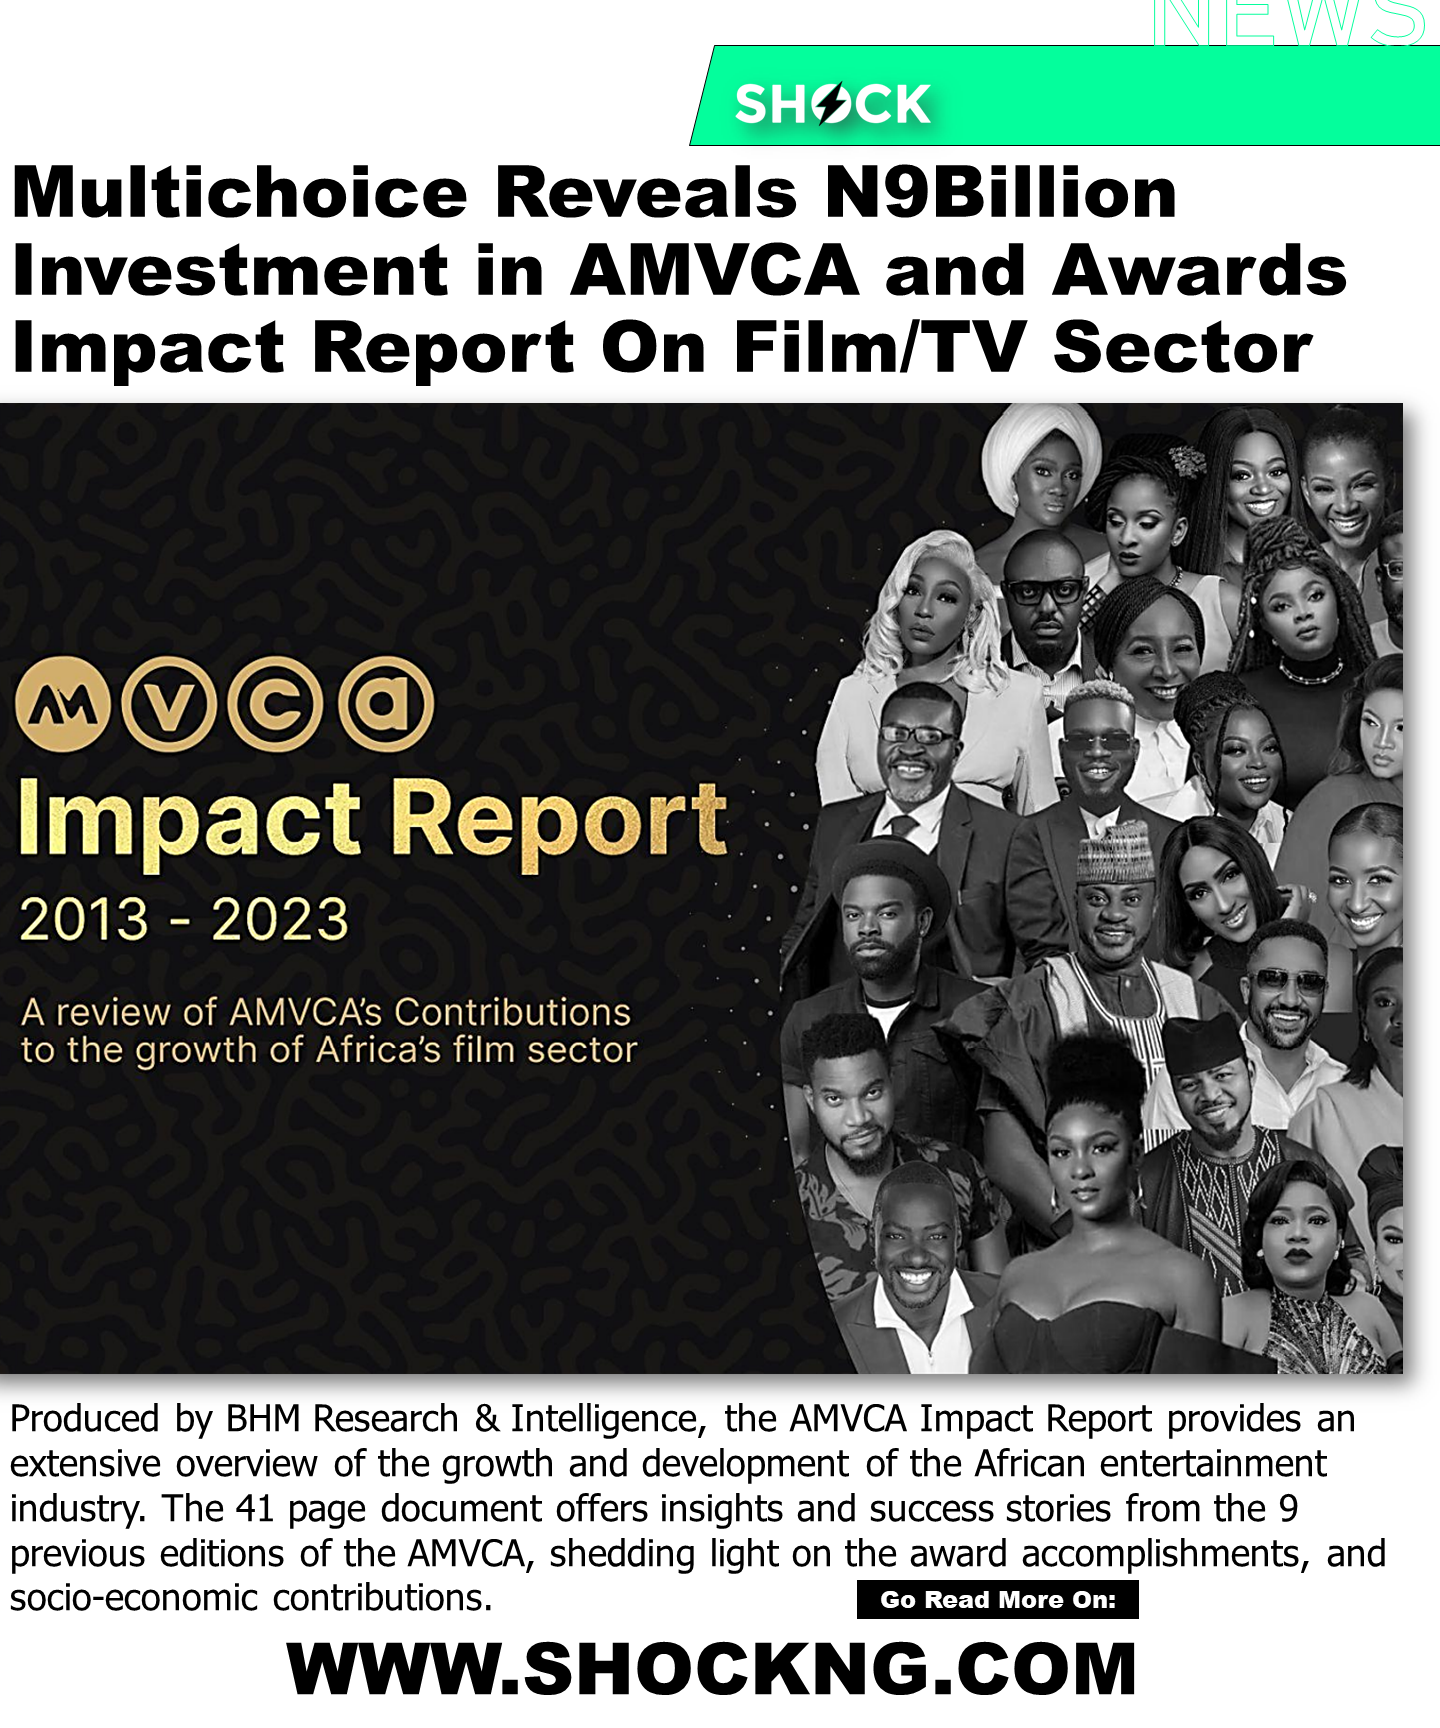 AMVCA nominess 2013 2023 - Multichoice Reveals N9Billion Investment in AMVCA and Awards Impact Report On Film/TV Sector